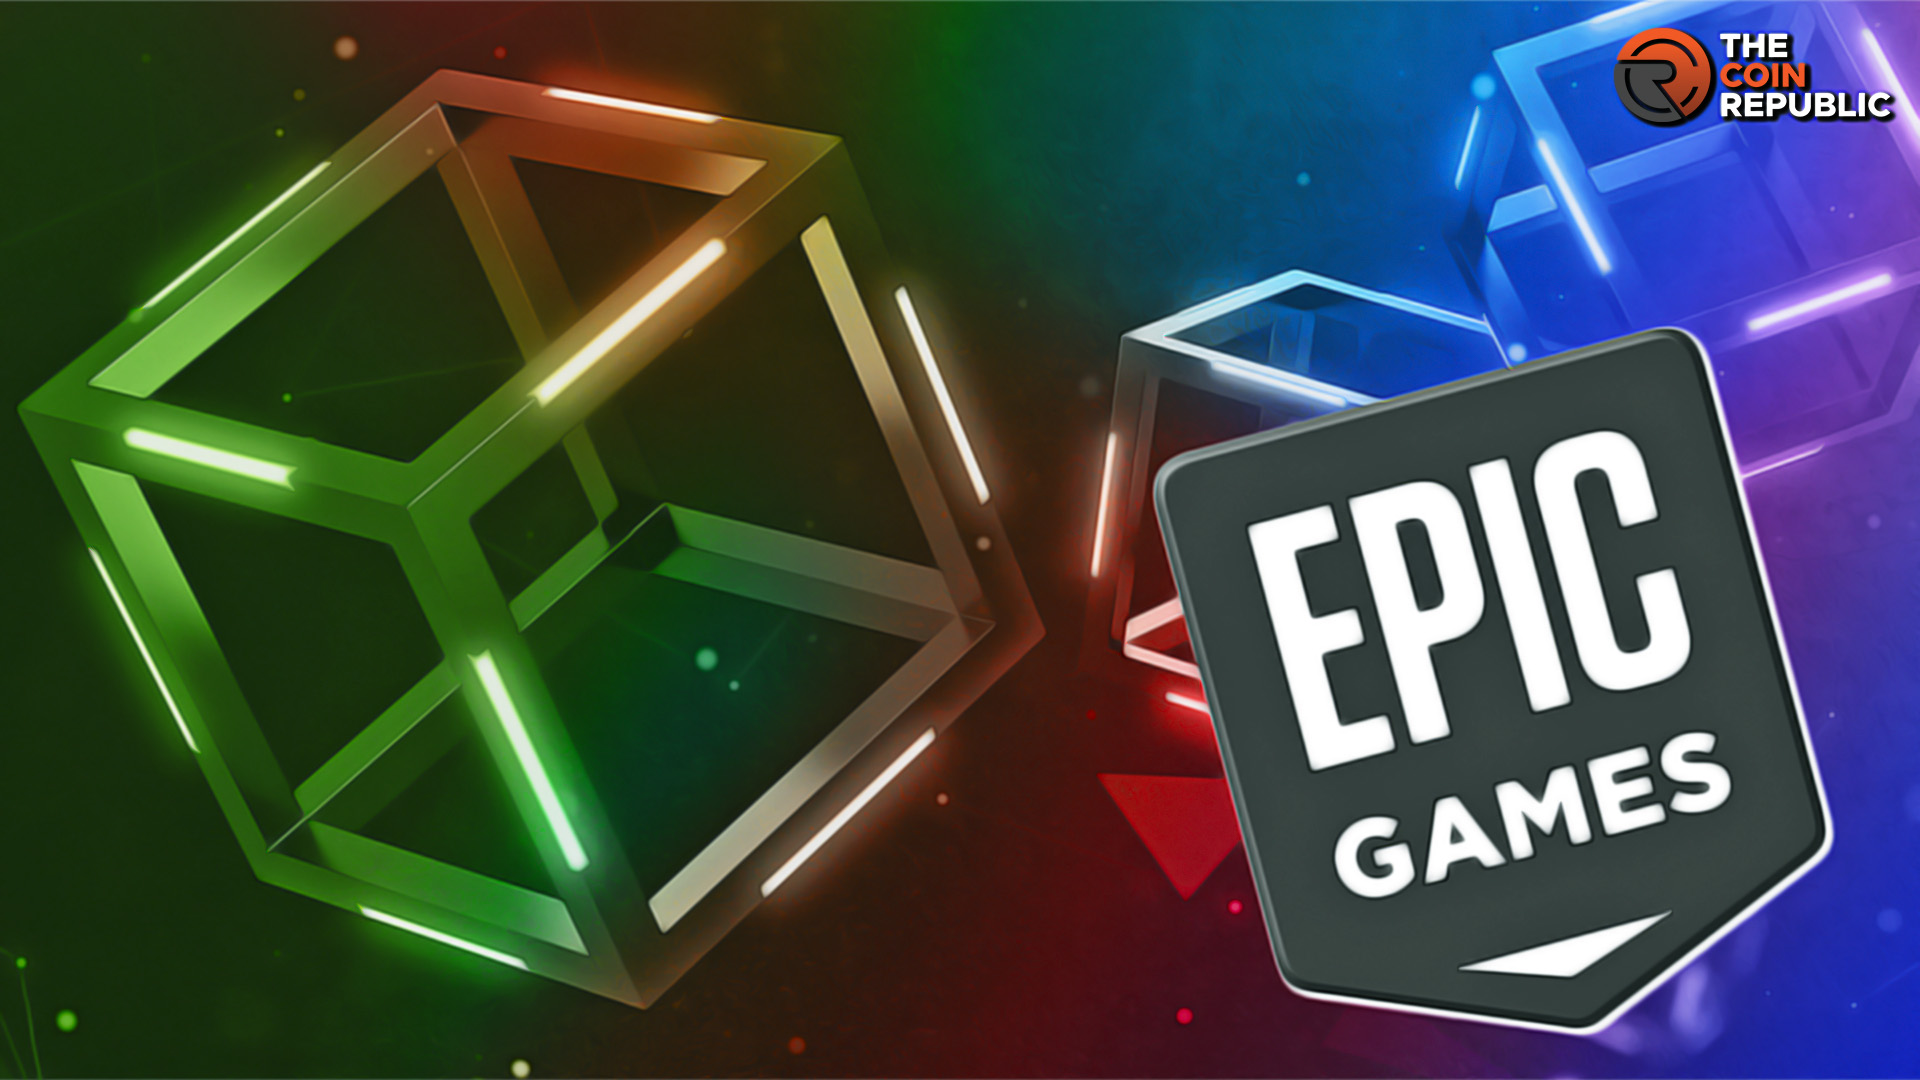 Epic Games Brings Blockchain Games Back After Updating Policy